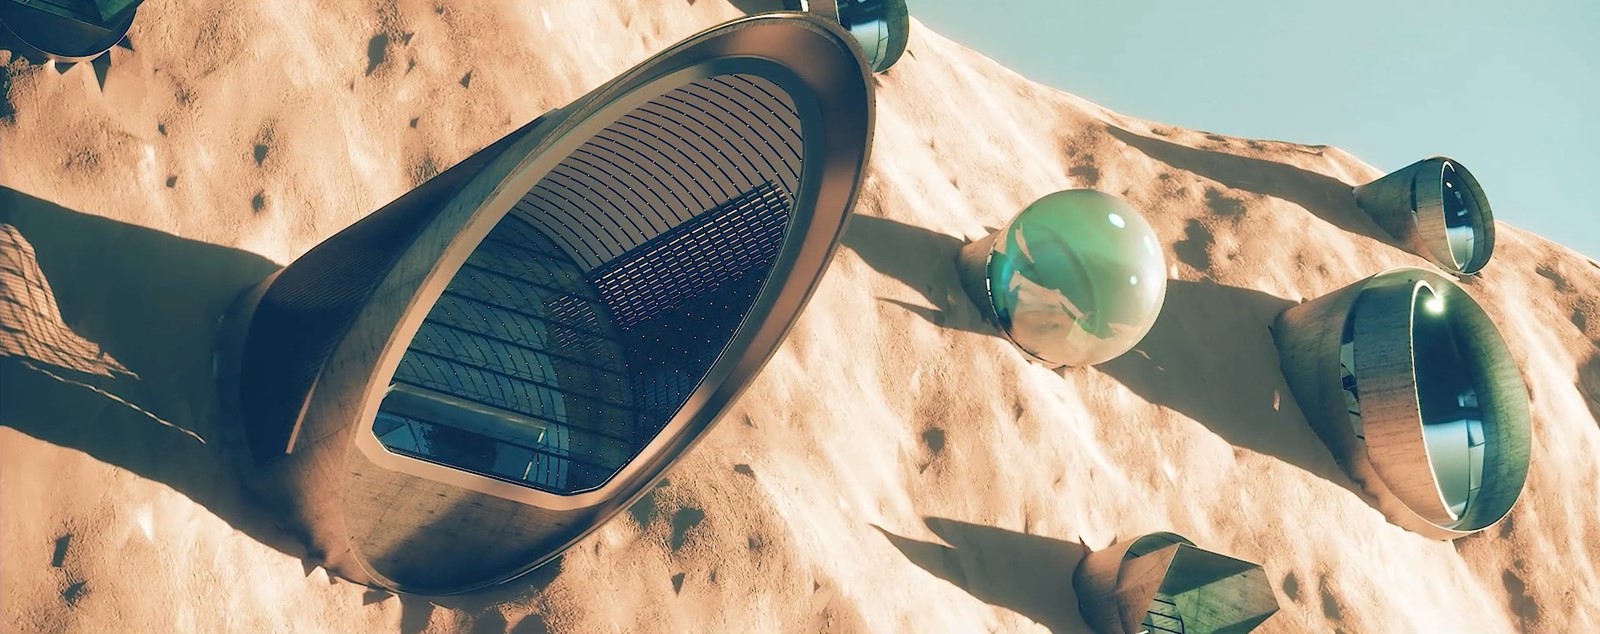 N&#252;wa, the first self-sustainable city on Mars 4